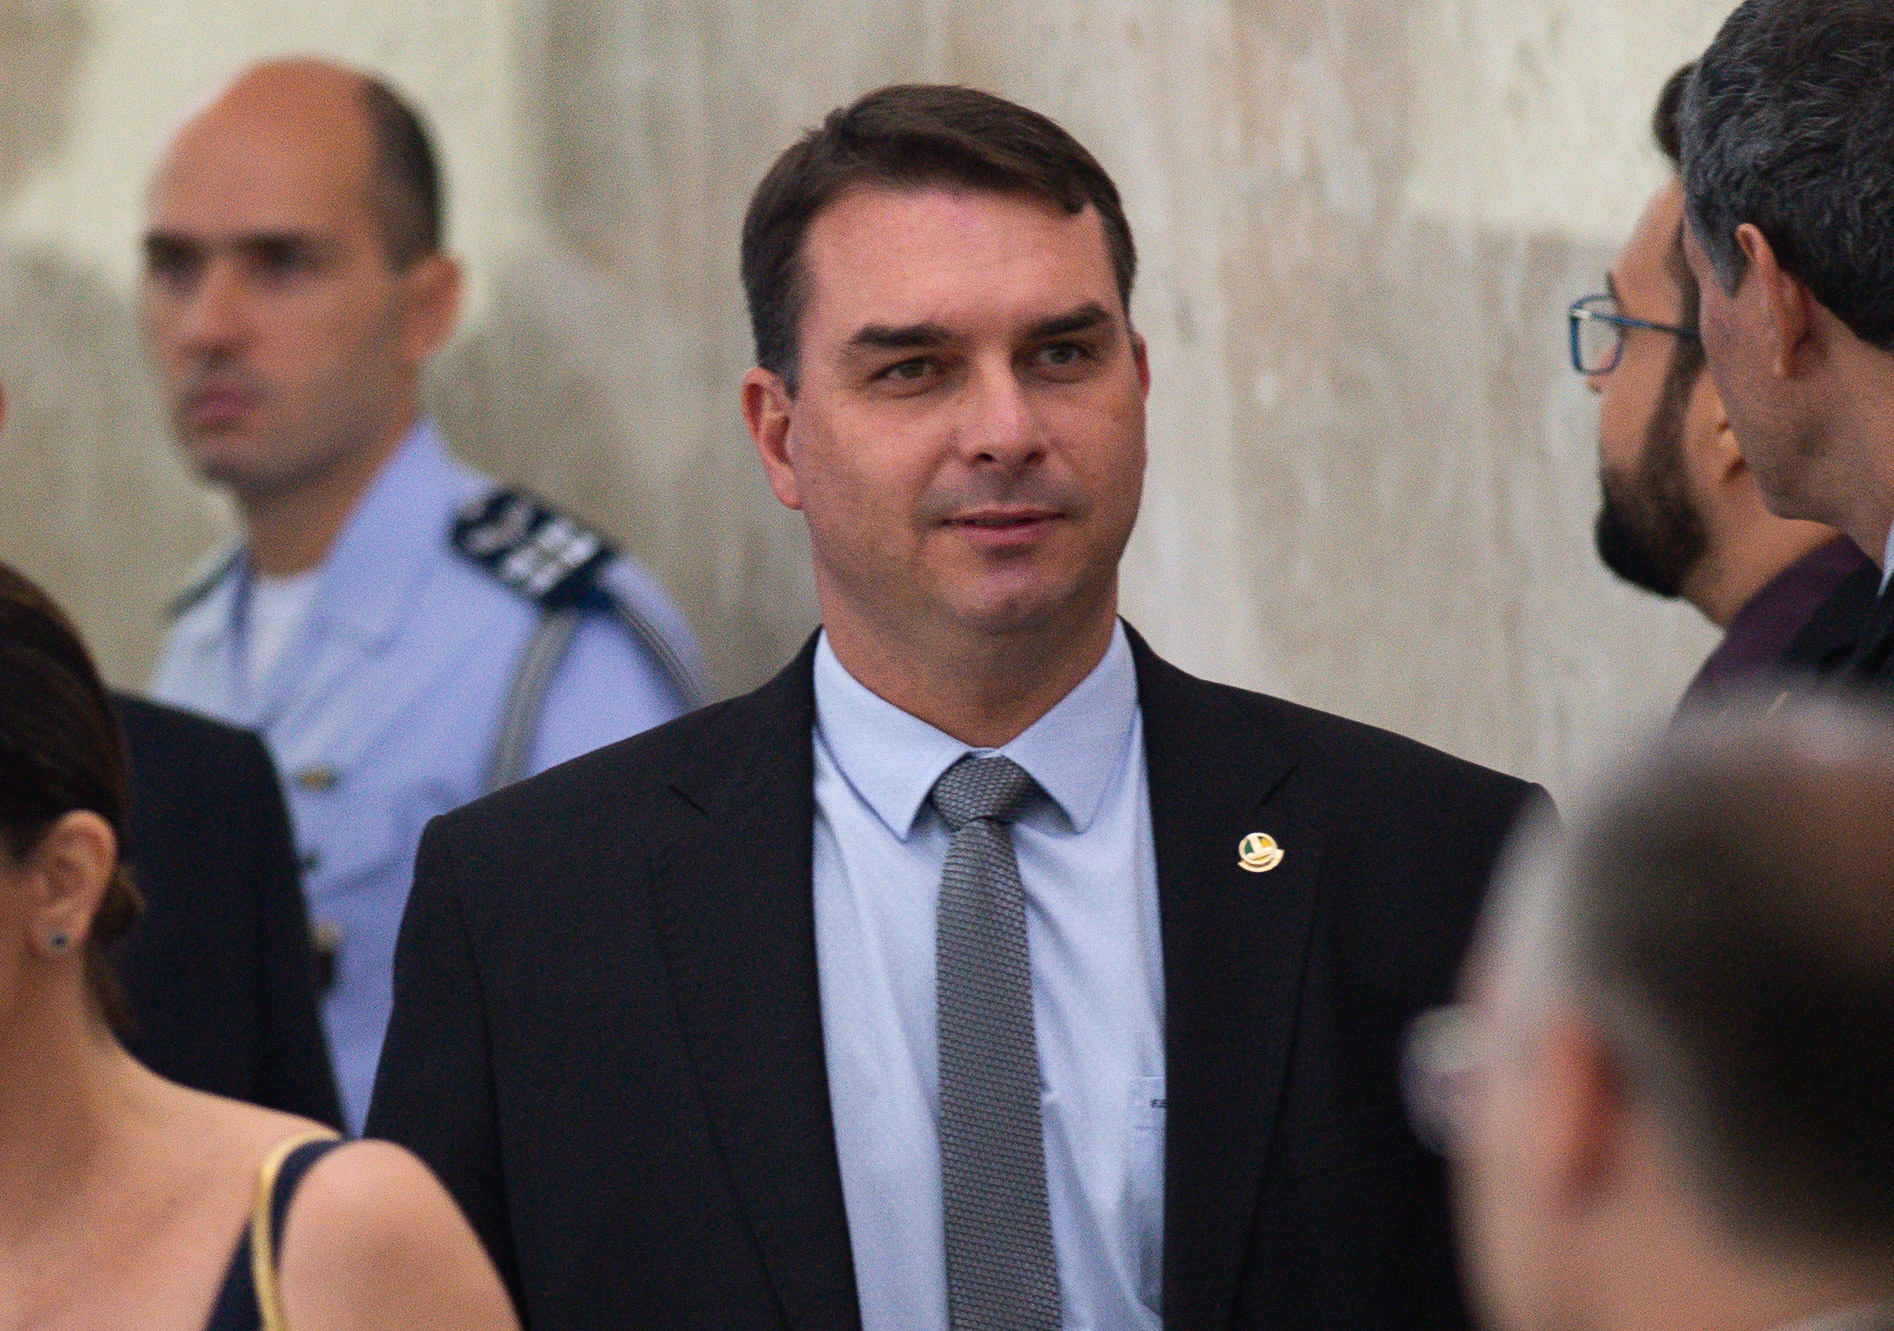 Senator Flavio Bolsonaro, son of the Brazilian president Jair Bolsonaro, arrives to the swearing in of the newly appointed Health Minister at the Planalto Palace on April 17 in Brasilia.